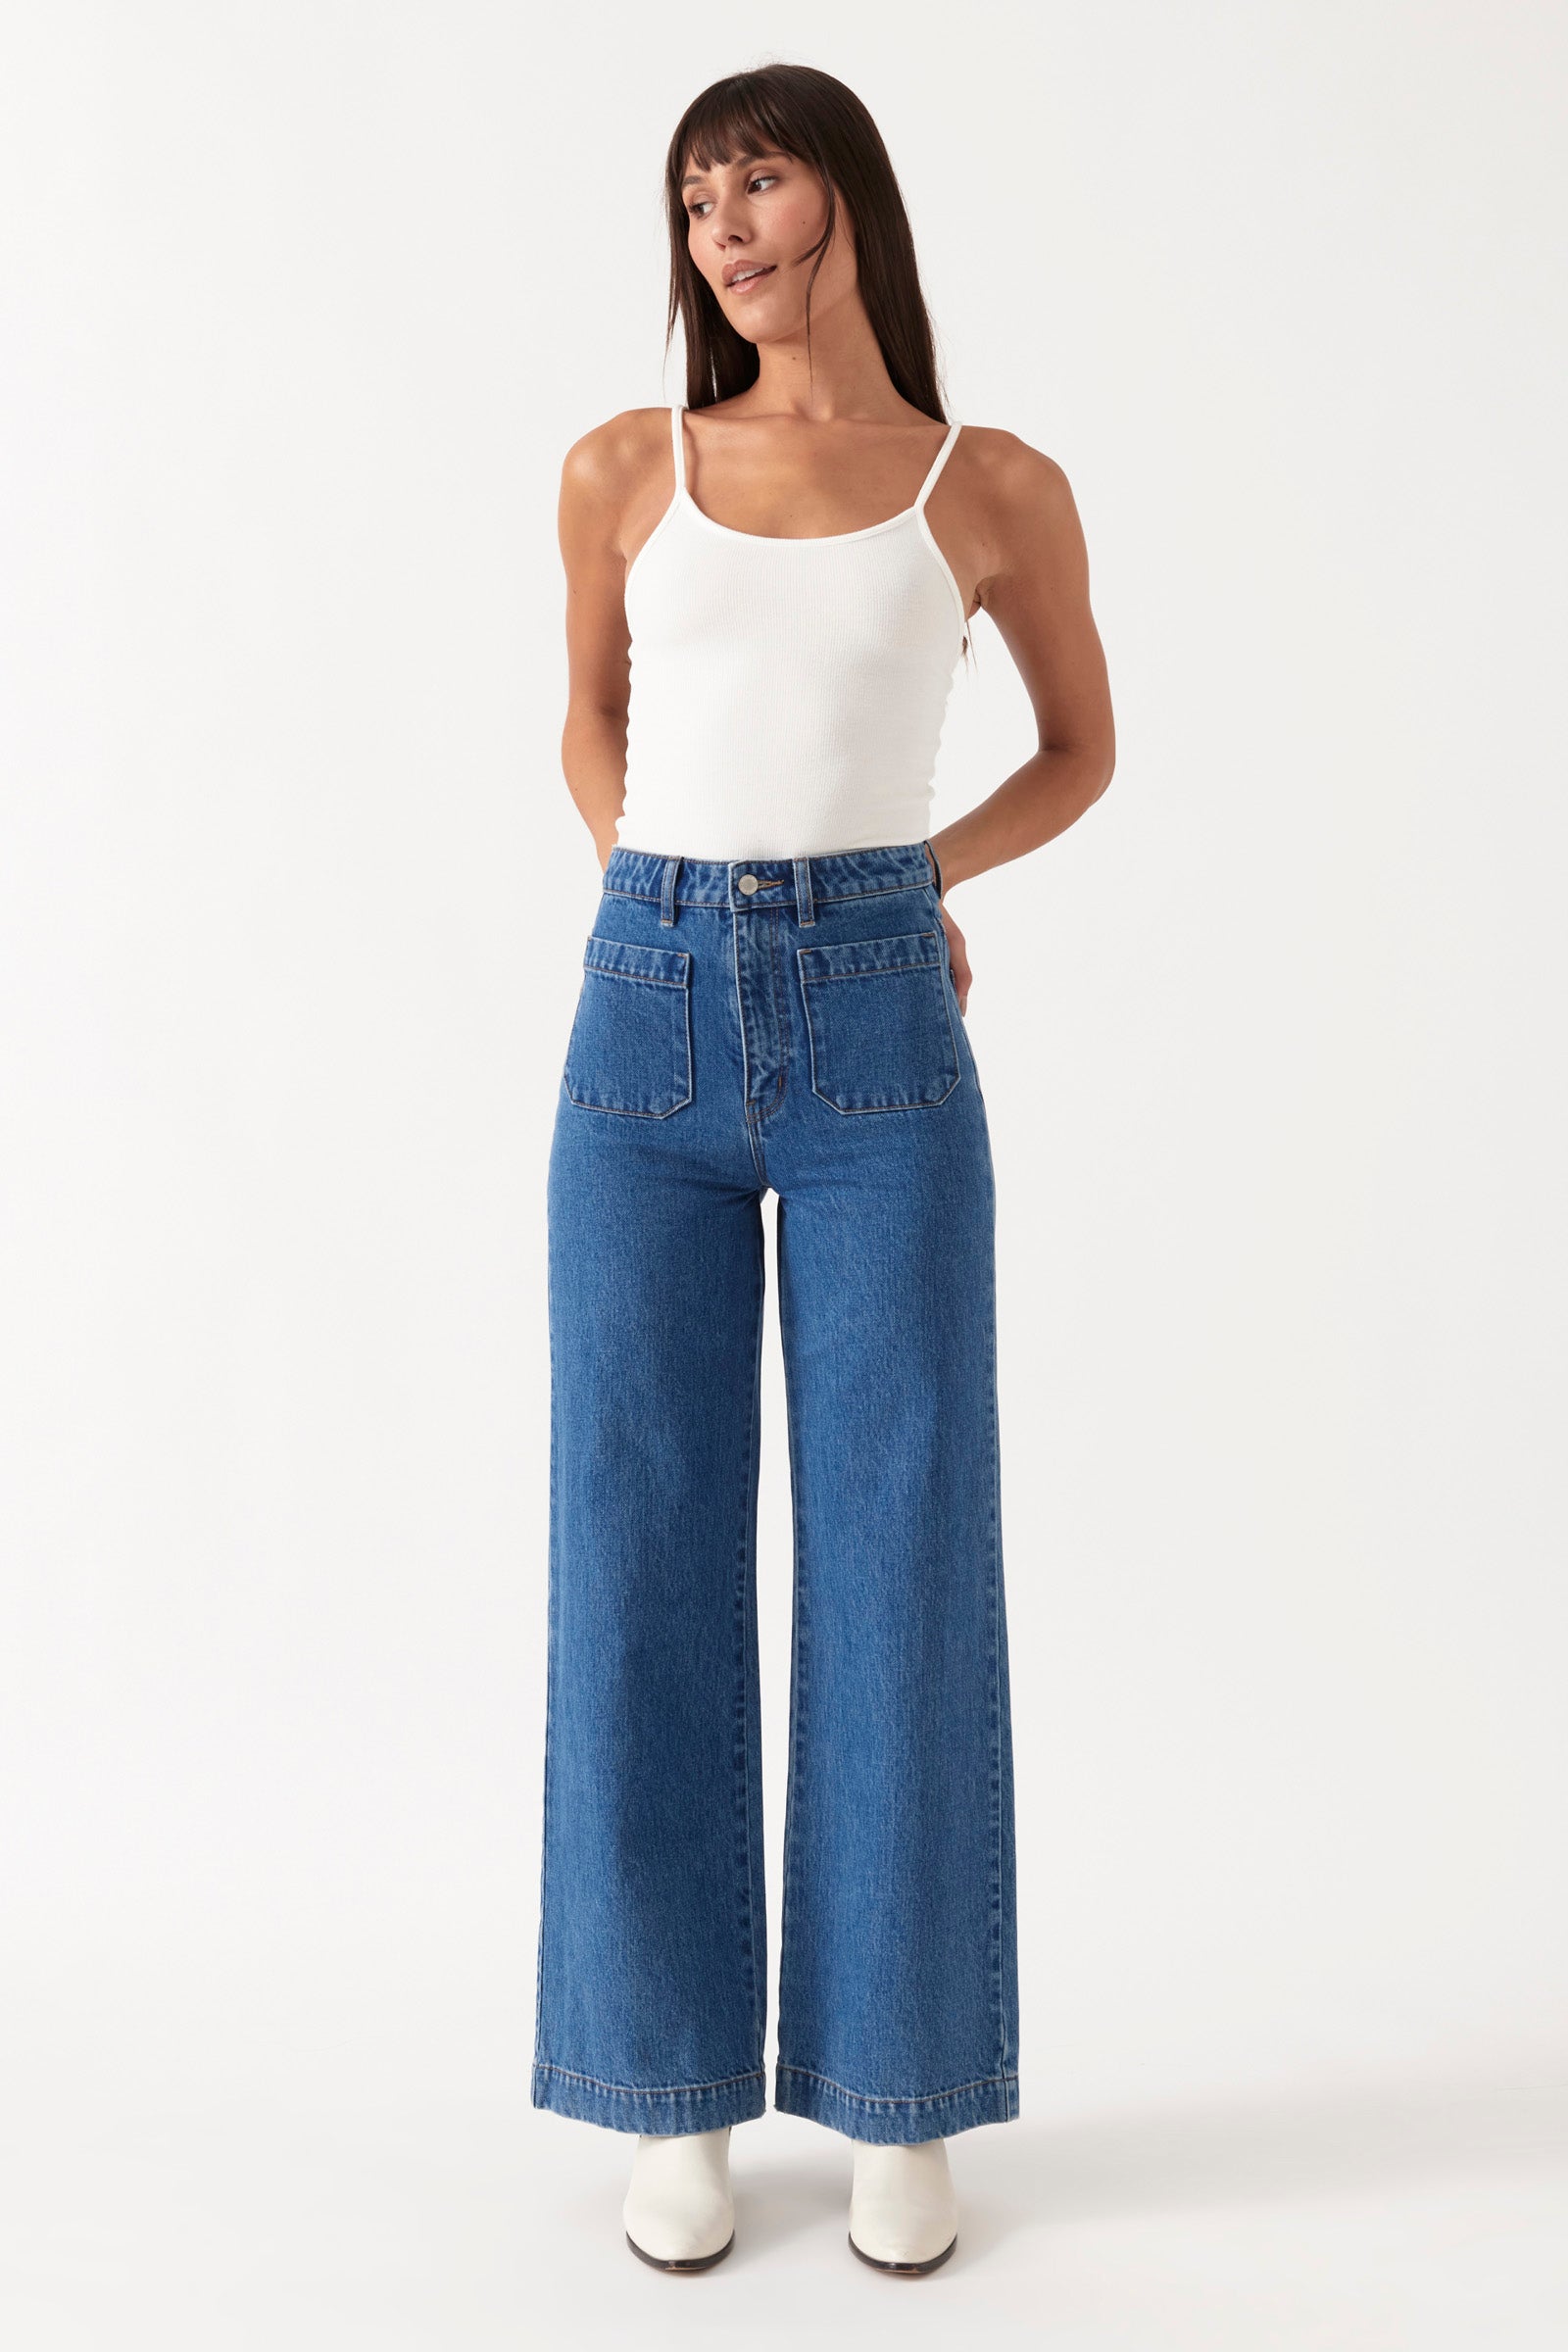 Women's High-rise Flare Jeans - Wild Fable™ Medium Wash : Target